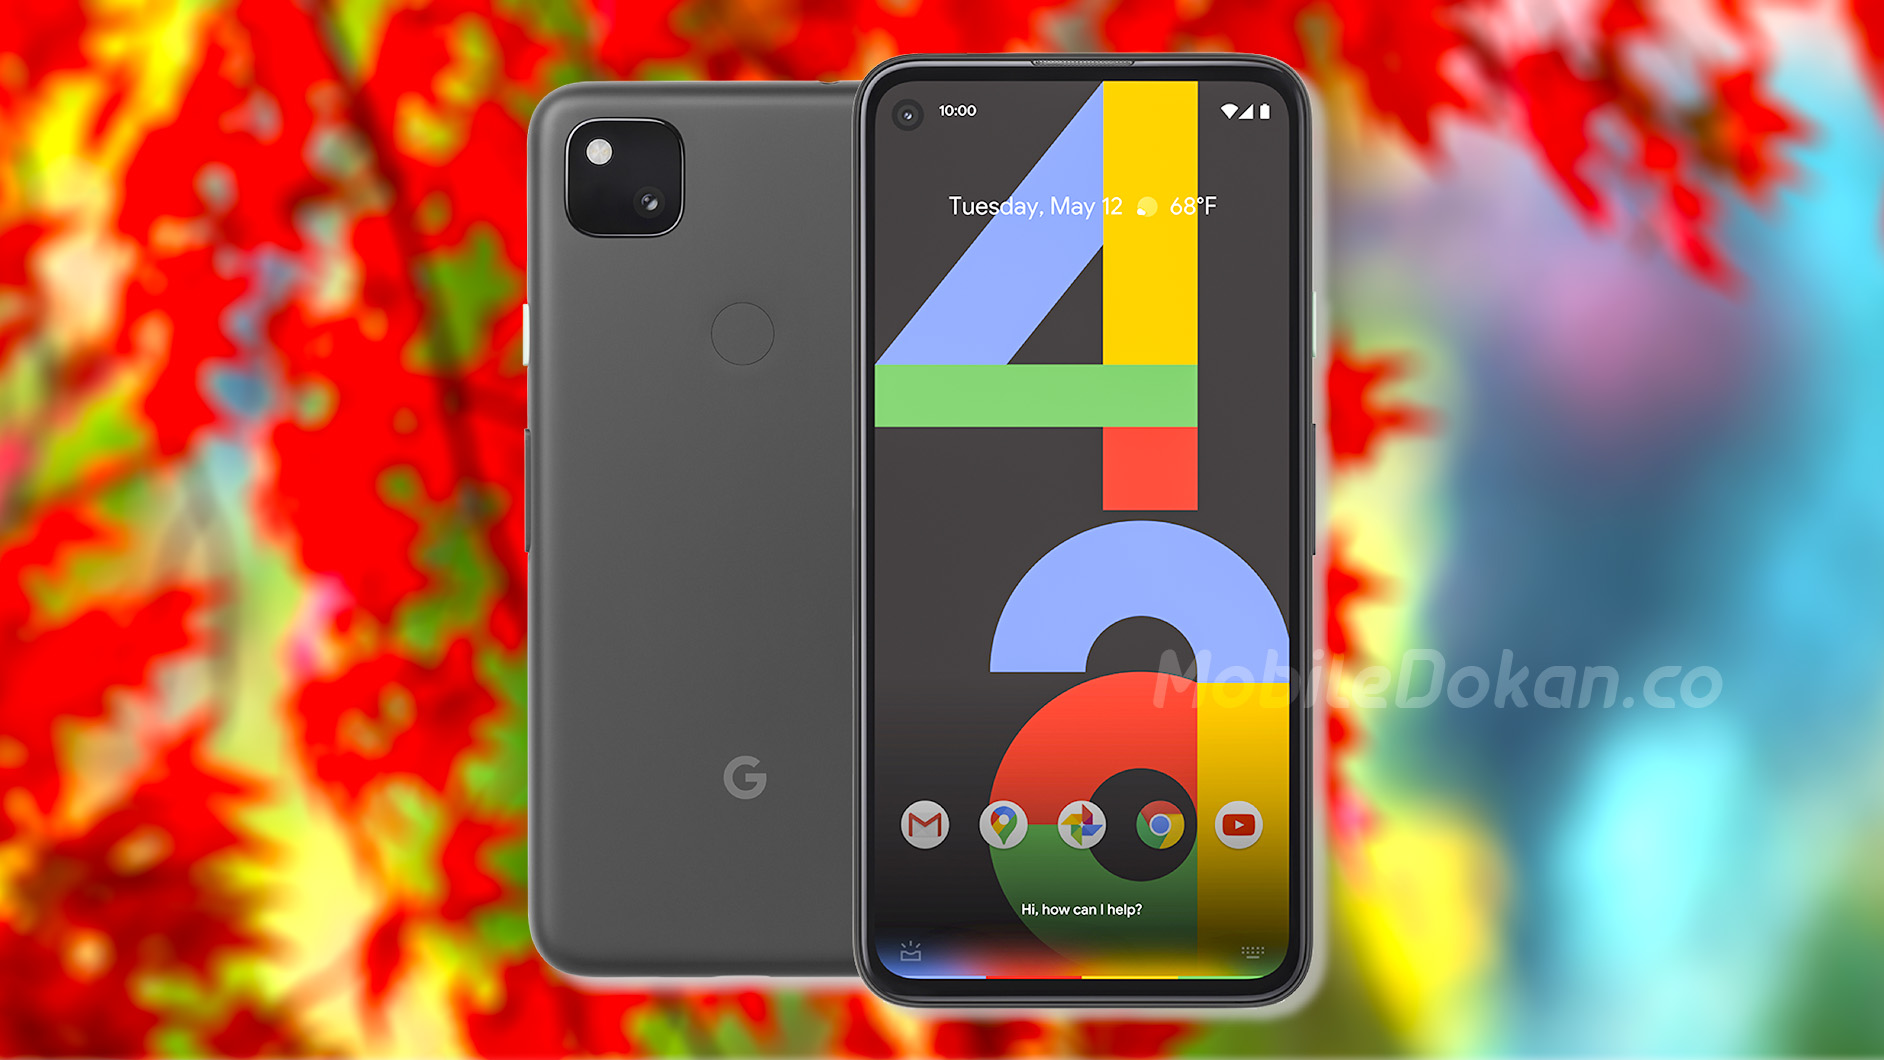 Google Pixel 4a Specifications 12MP, 6GB RAM